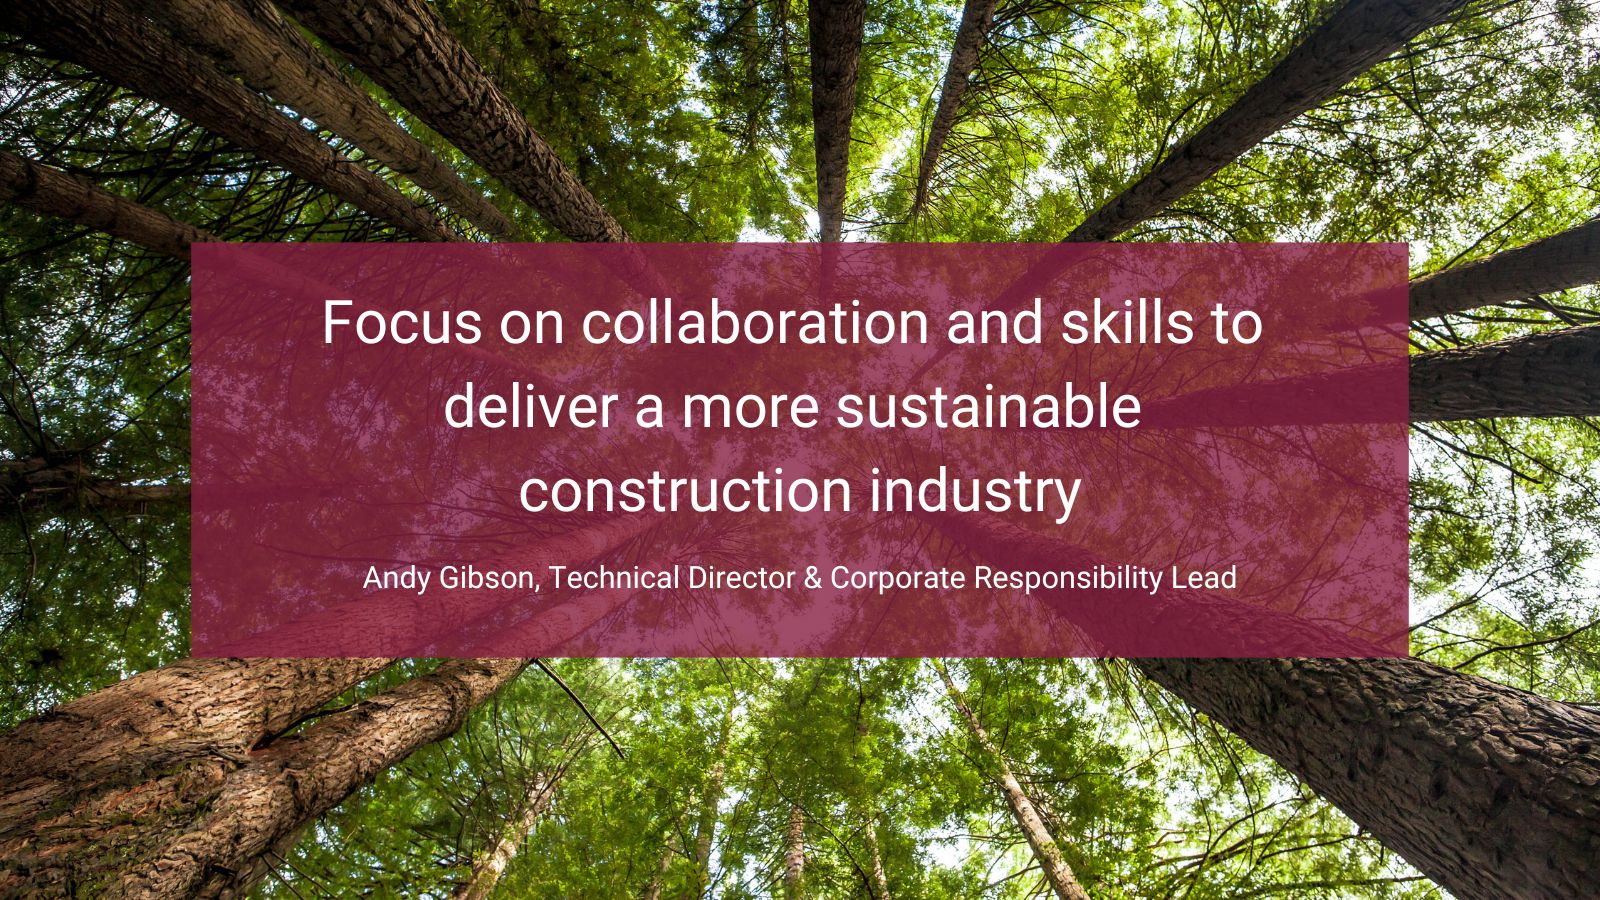 Focus on collaboration and skills to deliver a more sustainable construction industry